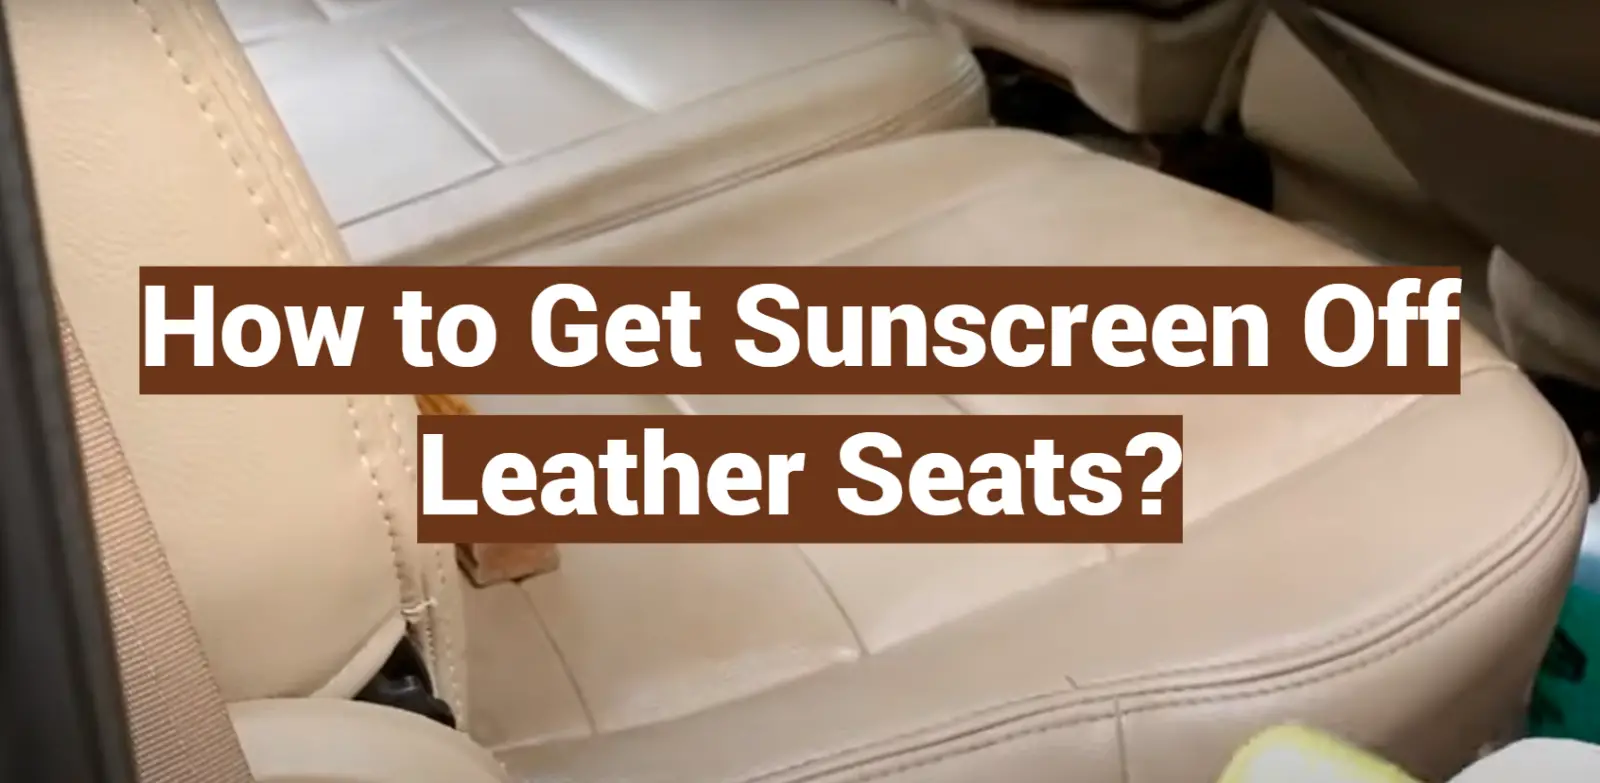 How to Get Sunscreen Off Leather Seats?